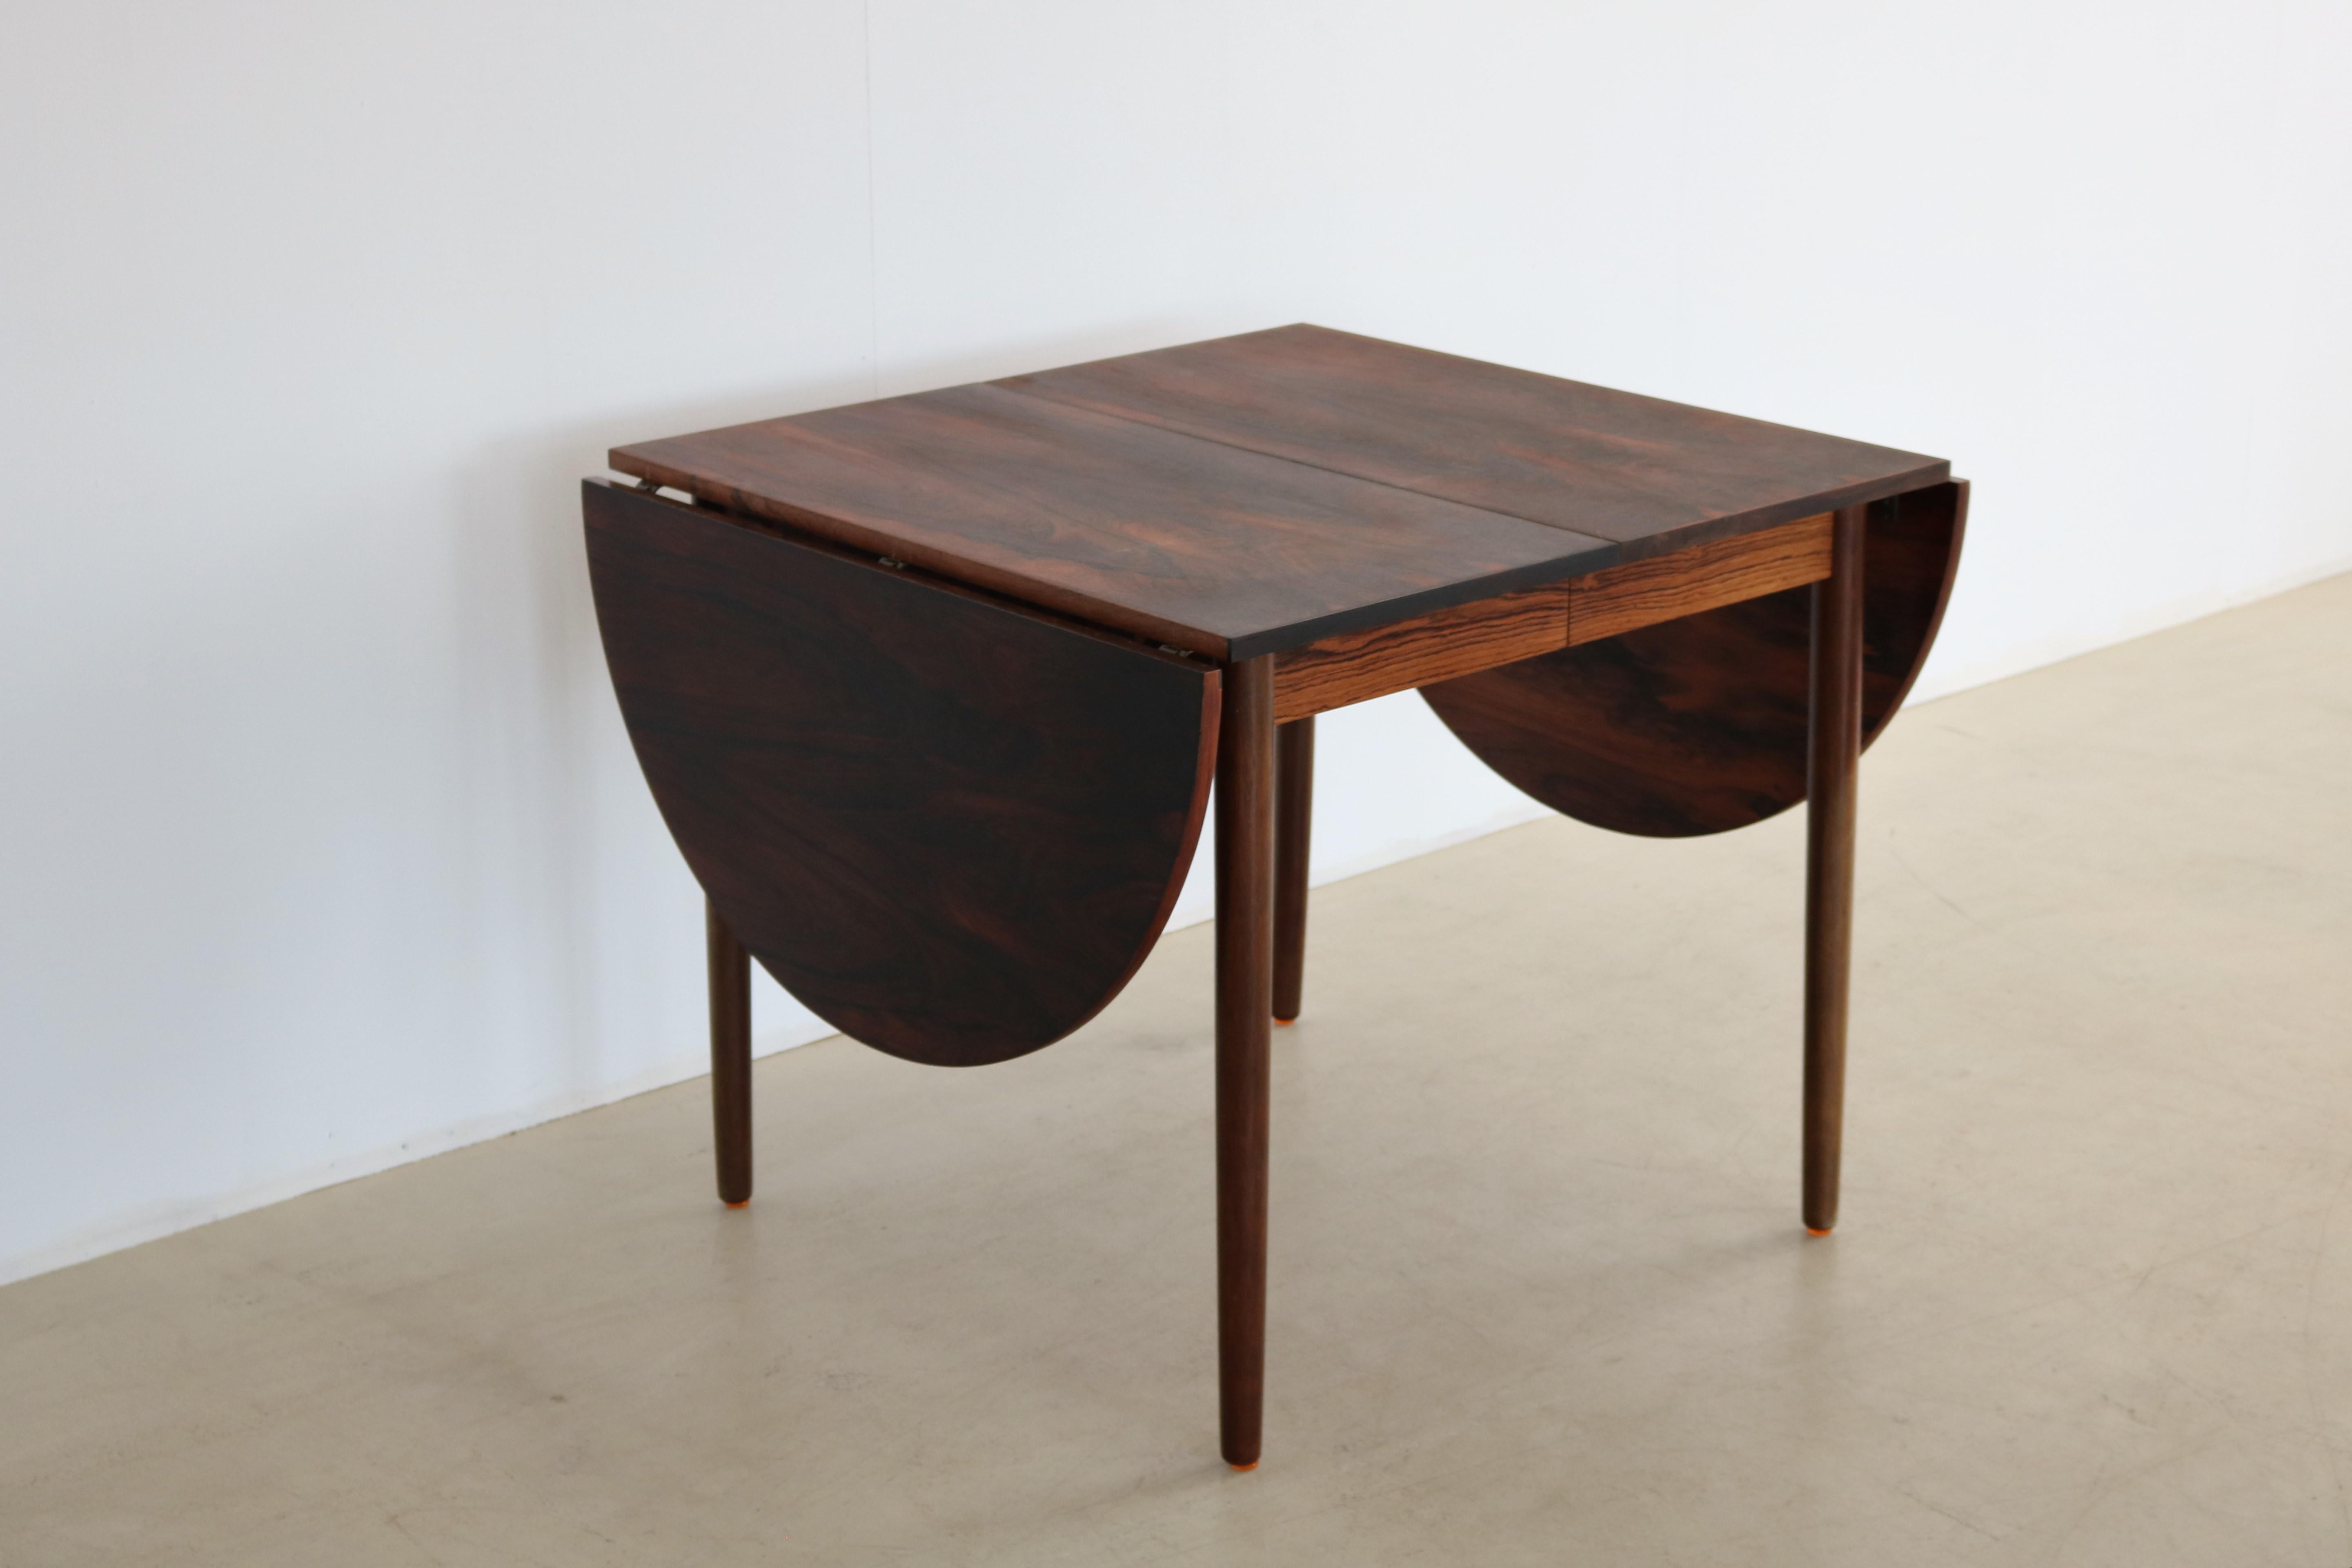 vintage dining table table extendable 1960s Danish 

Period 1960s
Designs Danish furniture manufacturer Denmark
Conditions good light signs of use
Size 73 x 73 x 85 (hxwxd) + 2x hemisphere of 43 + 2x insert leaf of 47.5 cm;

details rosewood;